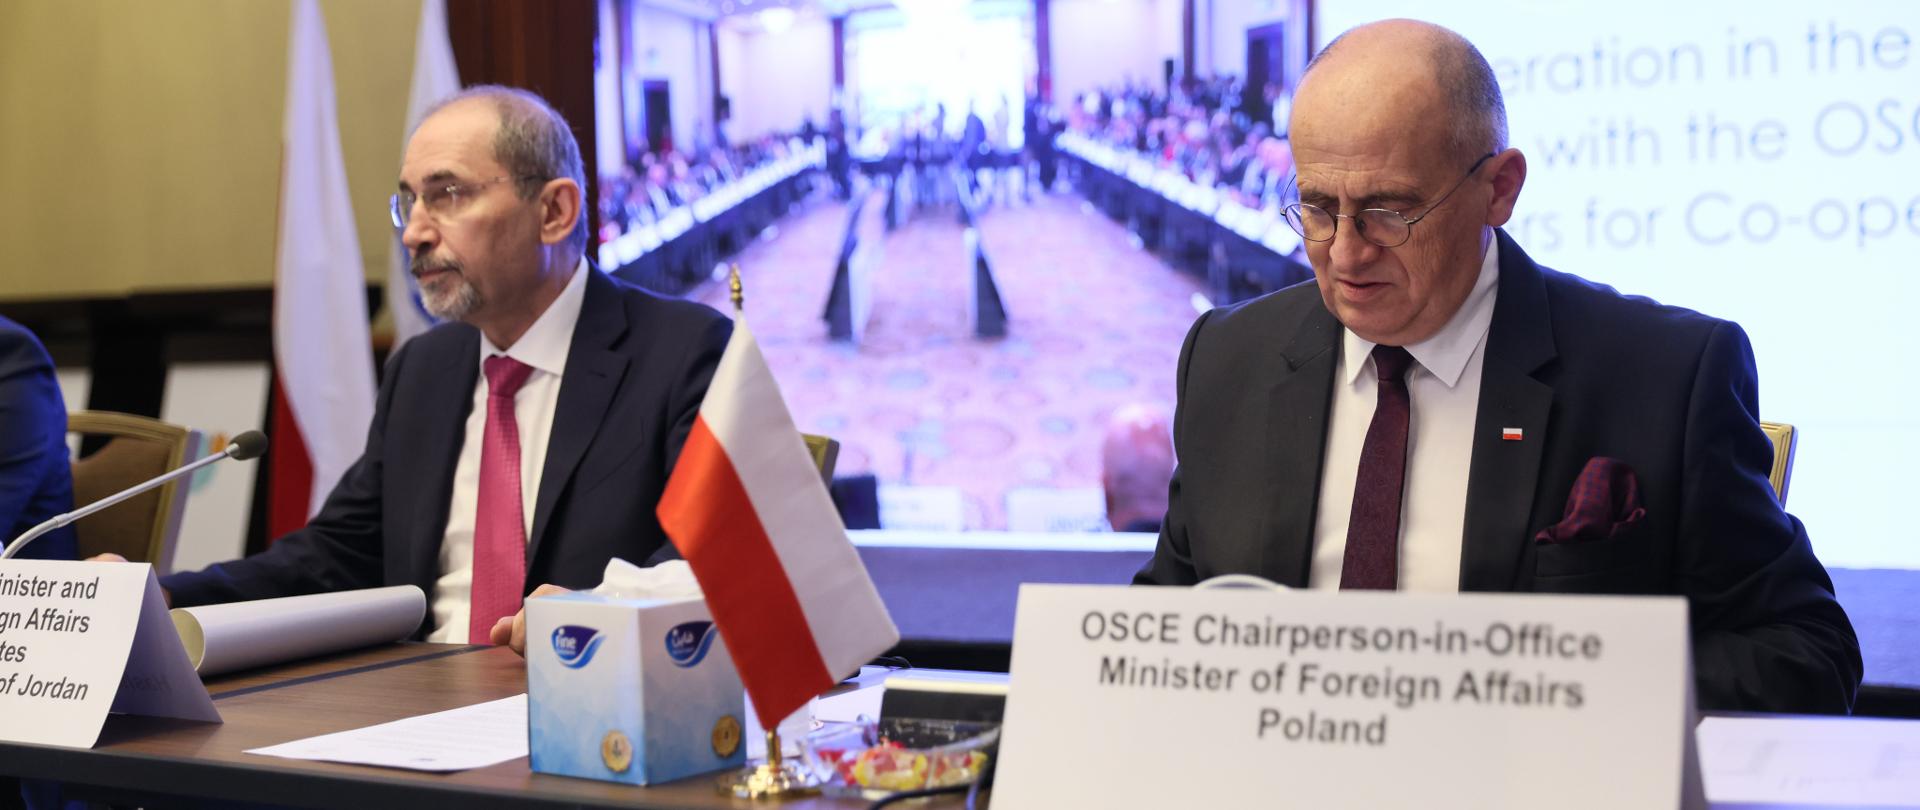 Minister of Foreign Affairs Zbigniew Rau during his visit to Jordan with Deputy Prime Minister and Minister of Foreign Affairs at OSCE Mediterranean Conference